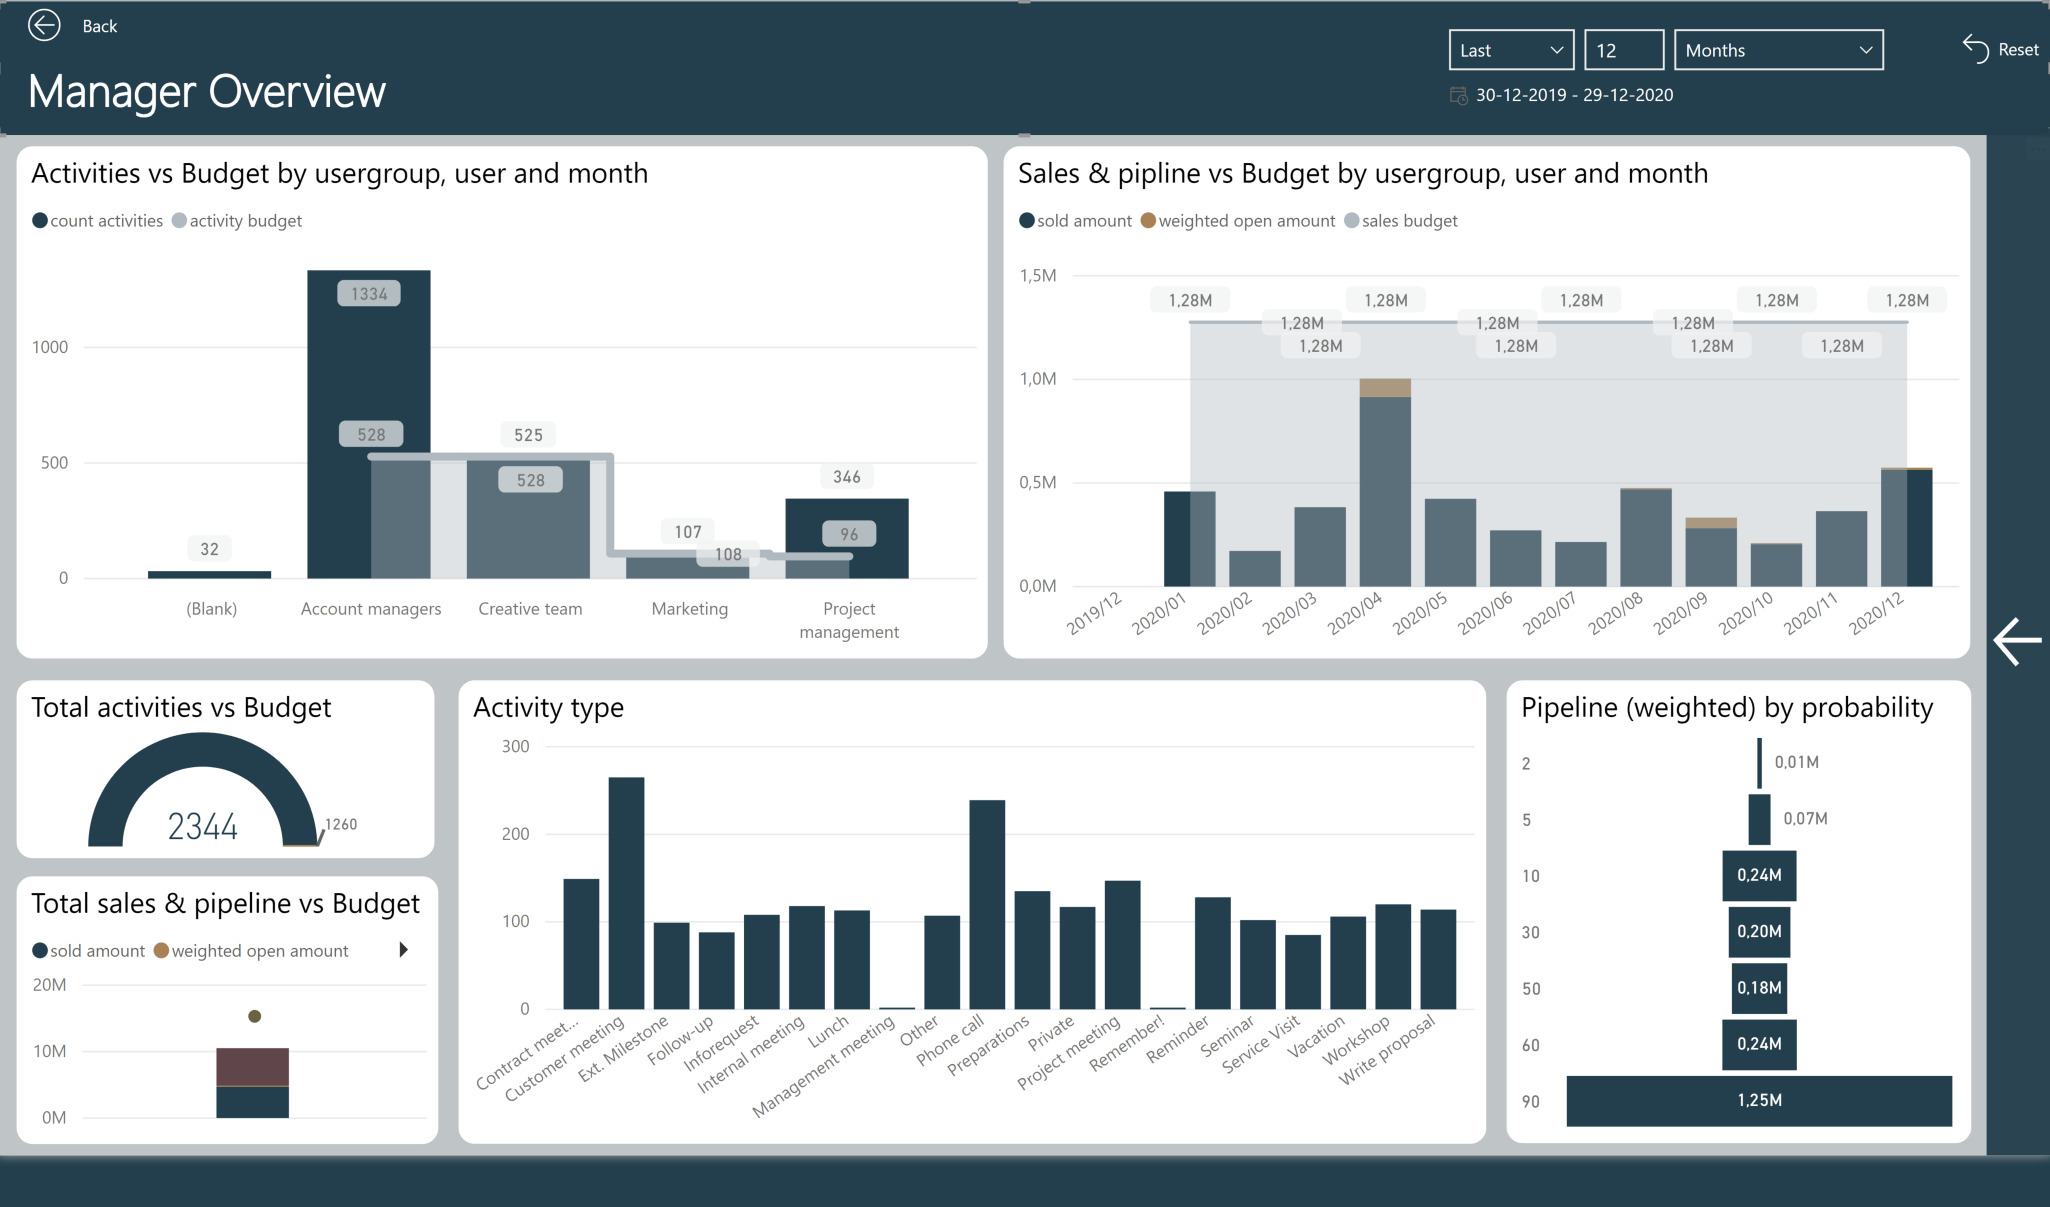 Dashboards and Reporting at SuperOffice